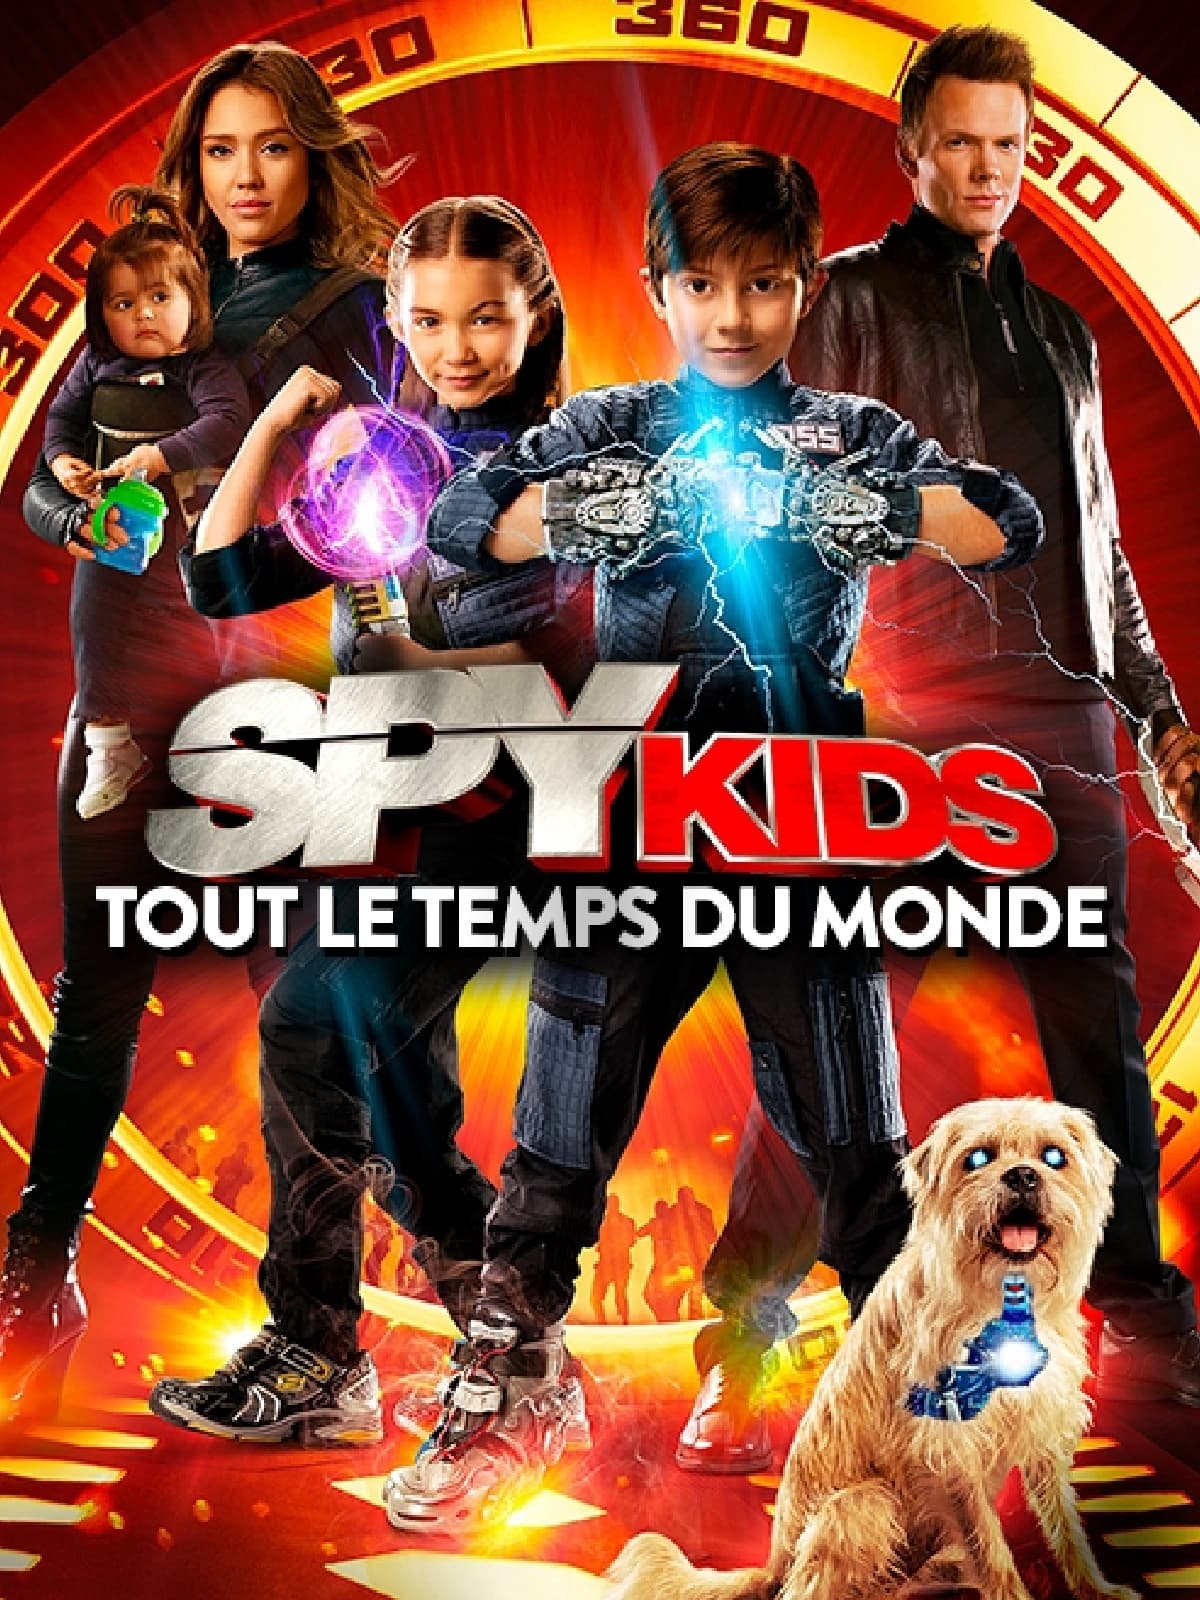 Affiche du film Spy Kids 4: All the Time in the World poster